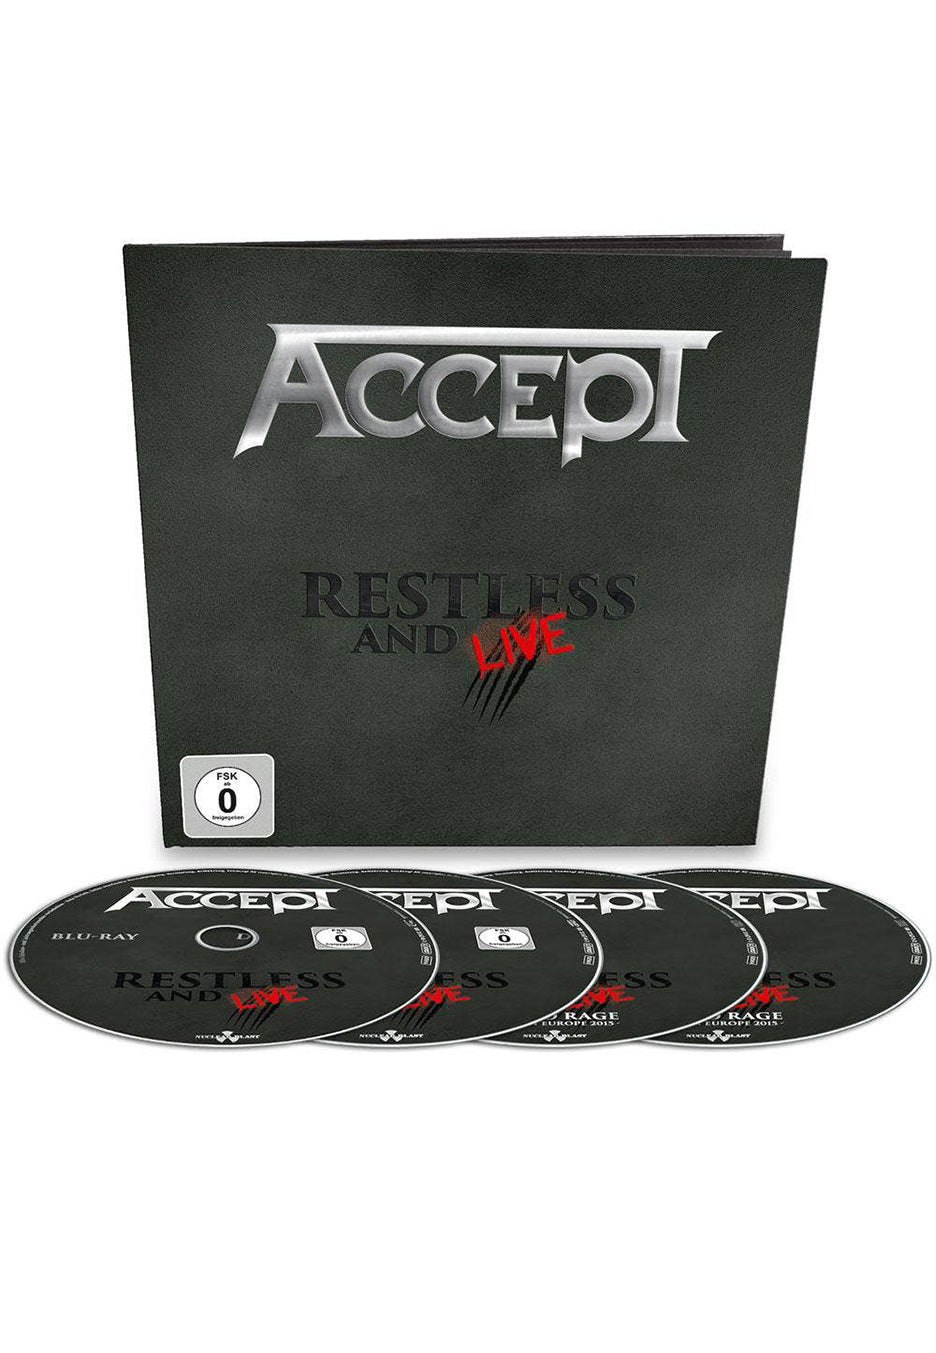 Accept - Restless And Live - Earbook